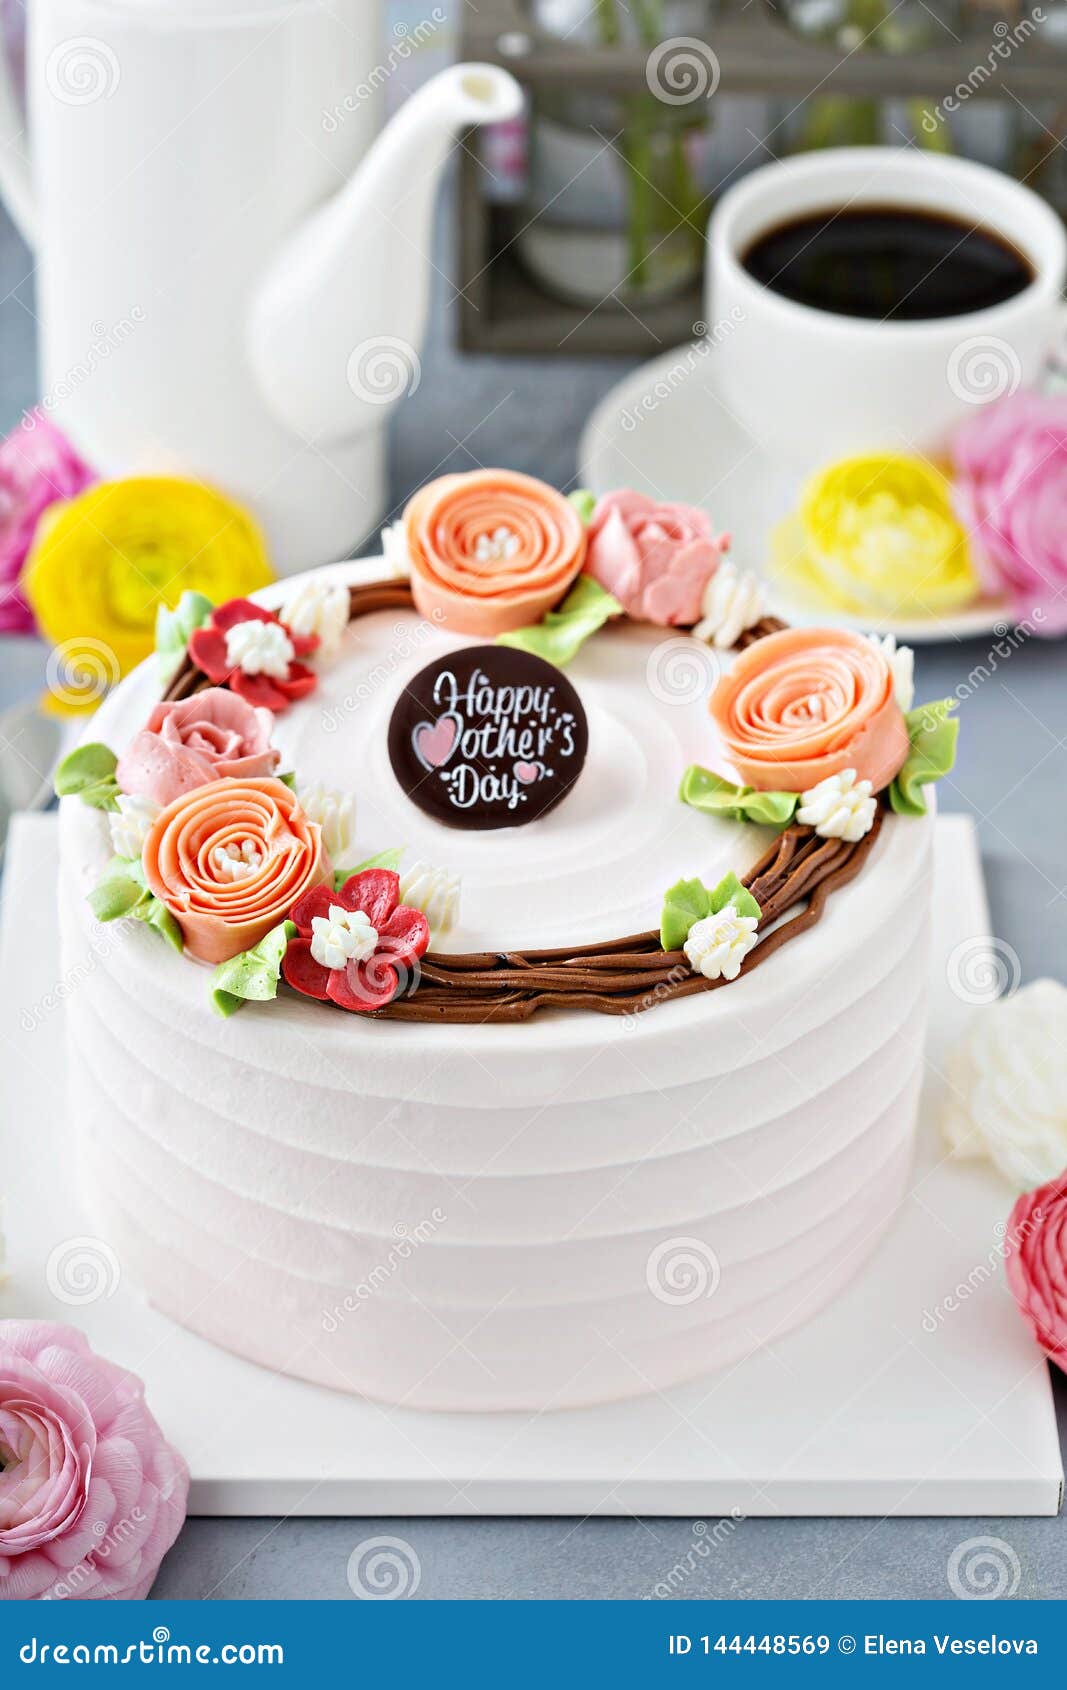 Mothers Day Cake with Flowers Stock Image - Image of happy, icing ...